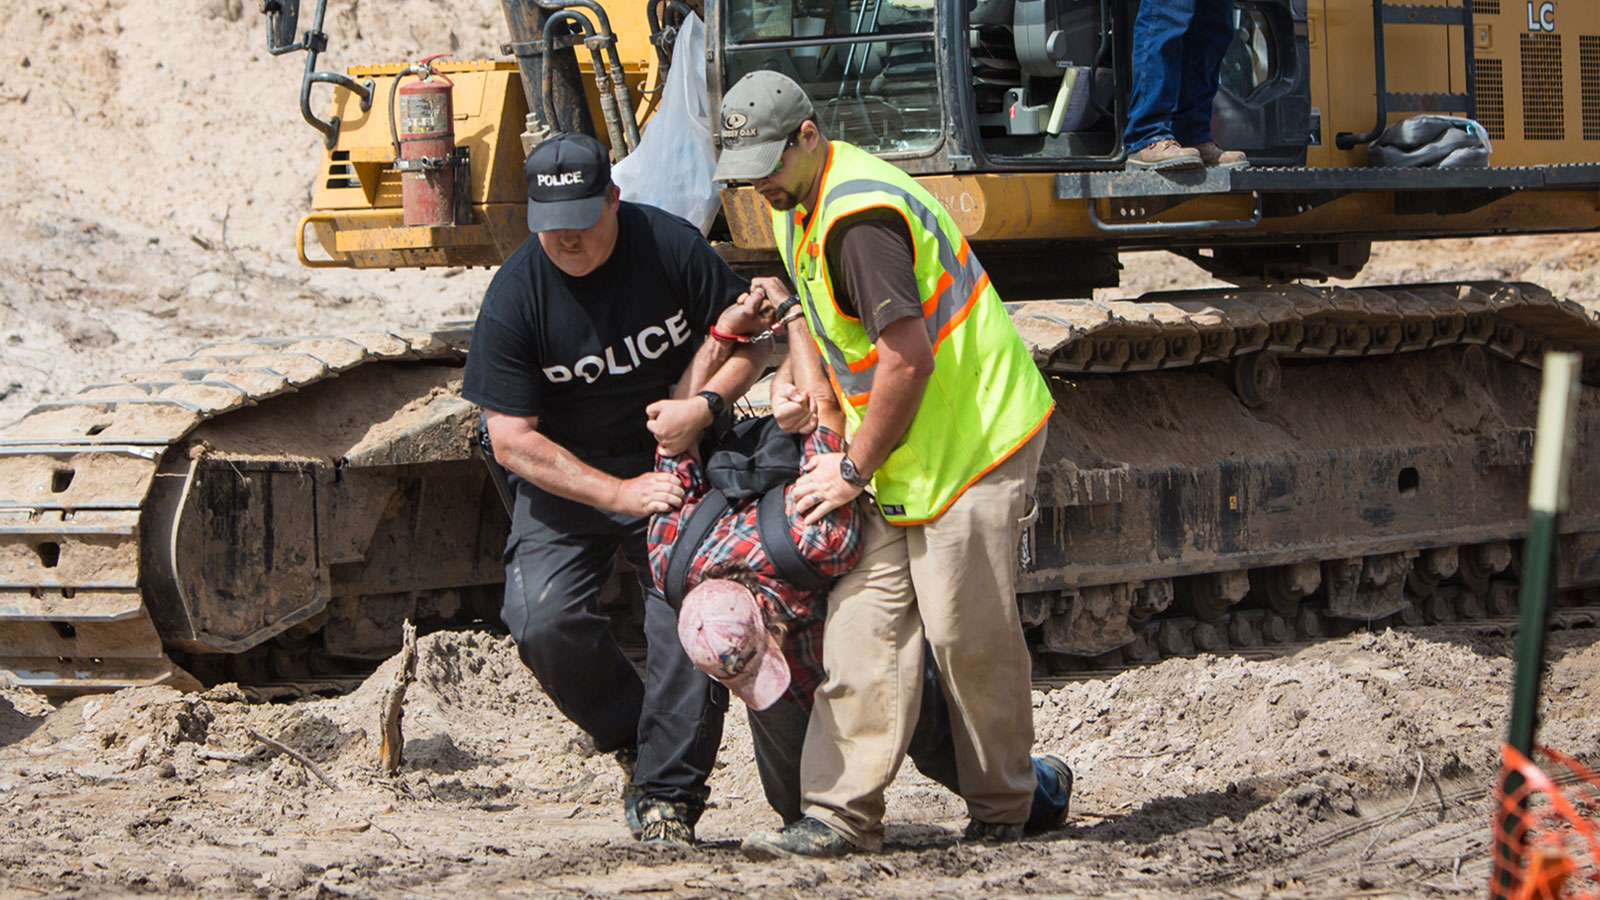 Environmental activist in the Tar Sands Blockade arrested after climbing on top of a work vehicle and attempting to attach a protest banner to it.